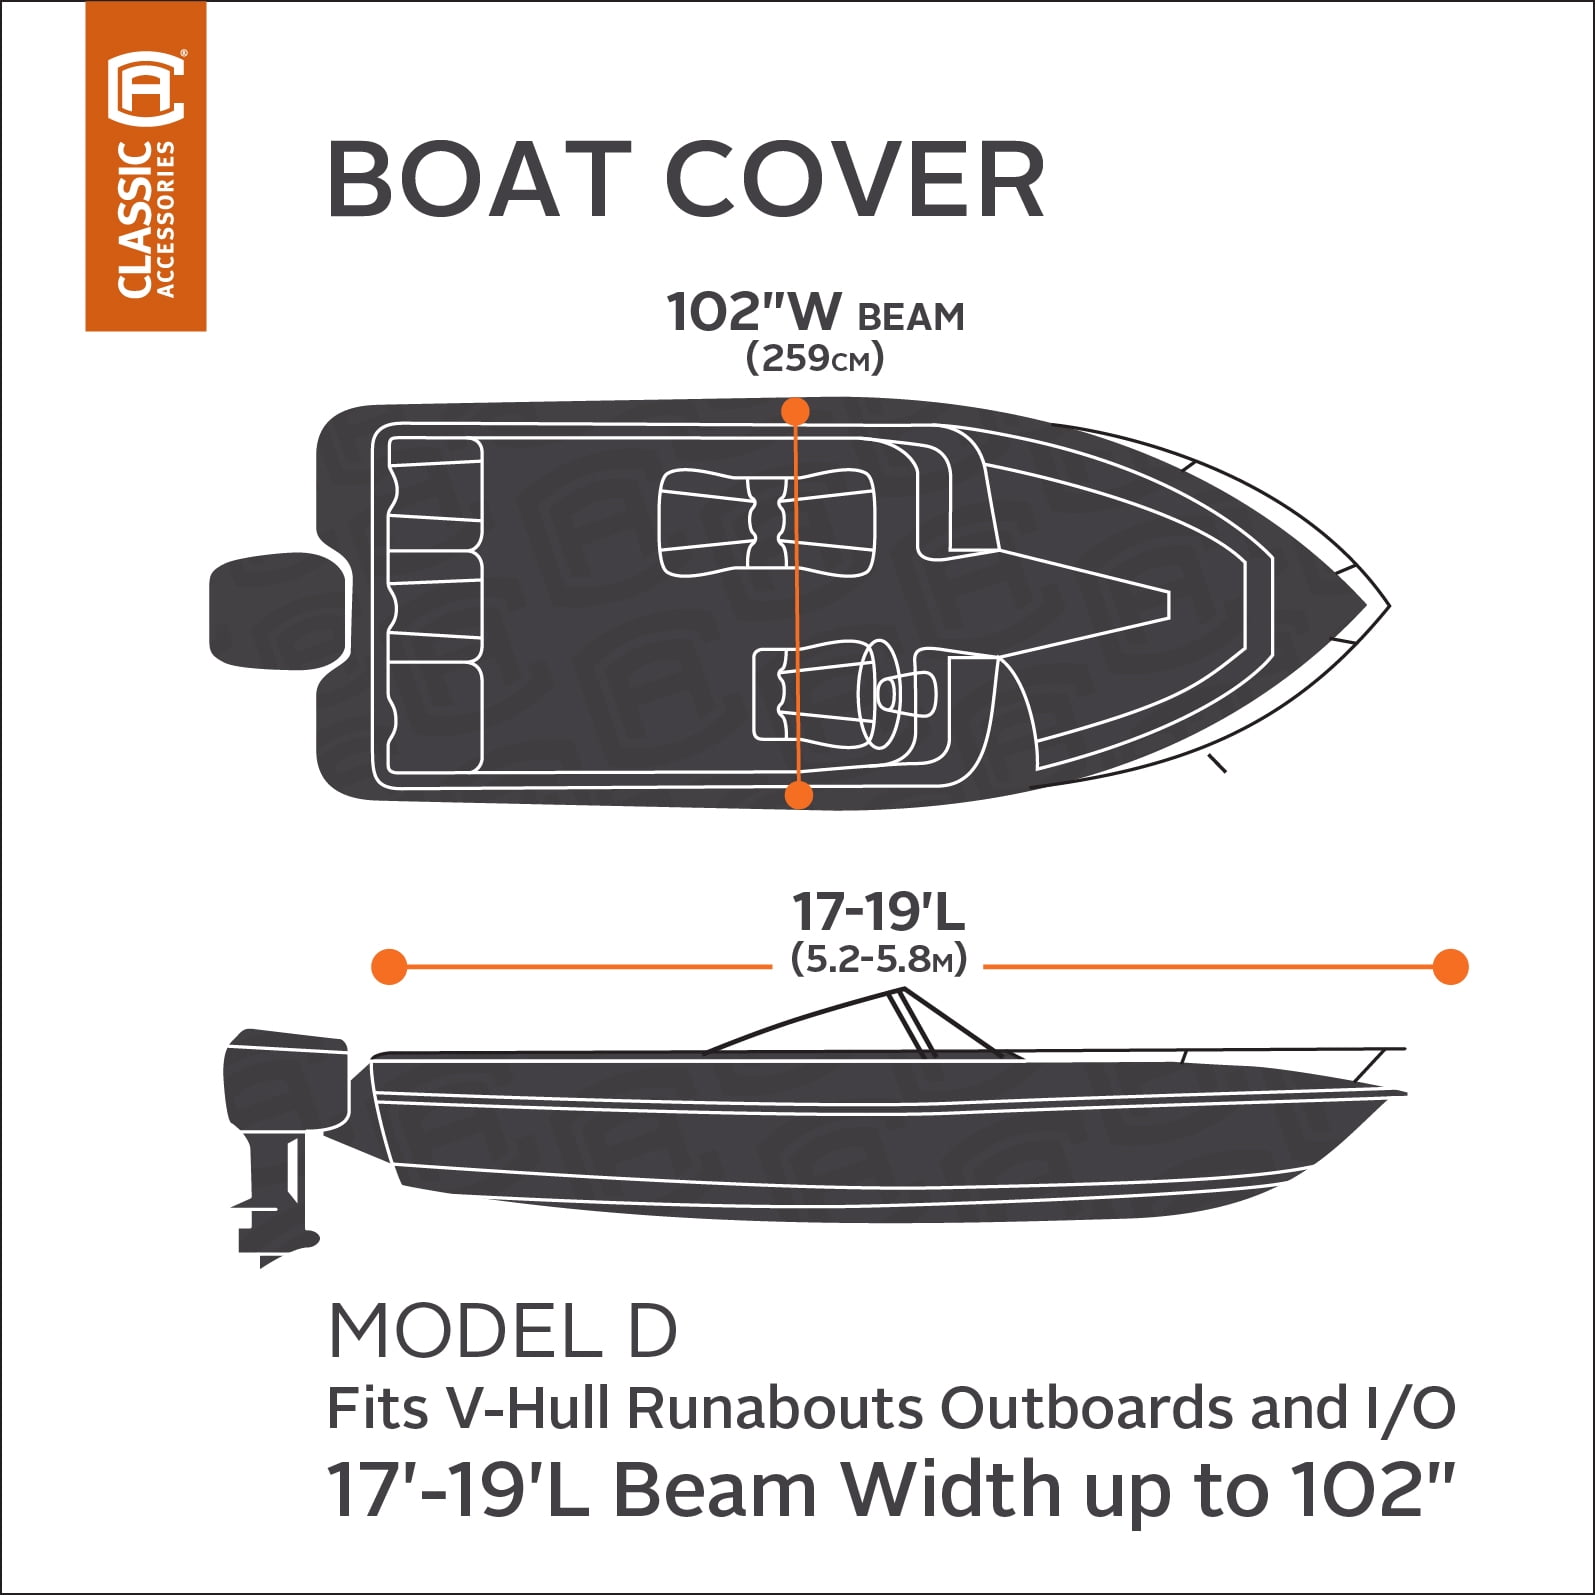 Classic Accessories Lunex RS-1™ Boat Cover, Fits Boats 14' - 16' L x 75 W,  Trailerable Boat Cover with All-Weather Ripstop Fabric, Model A